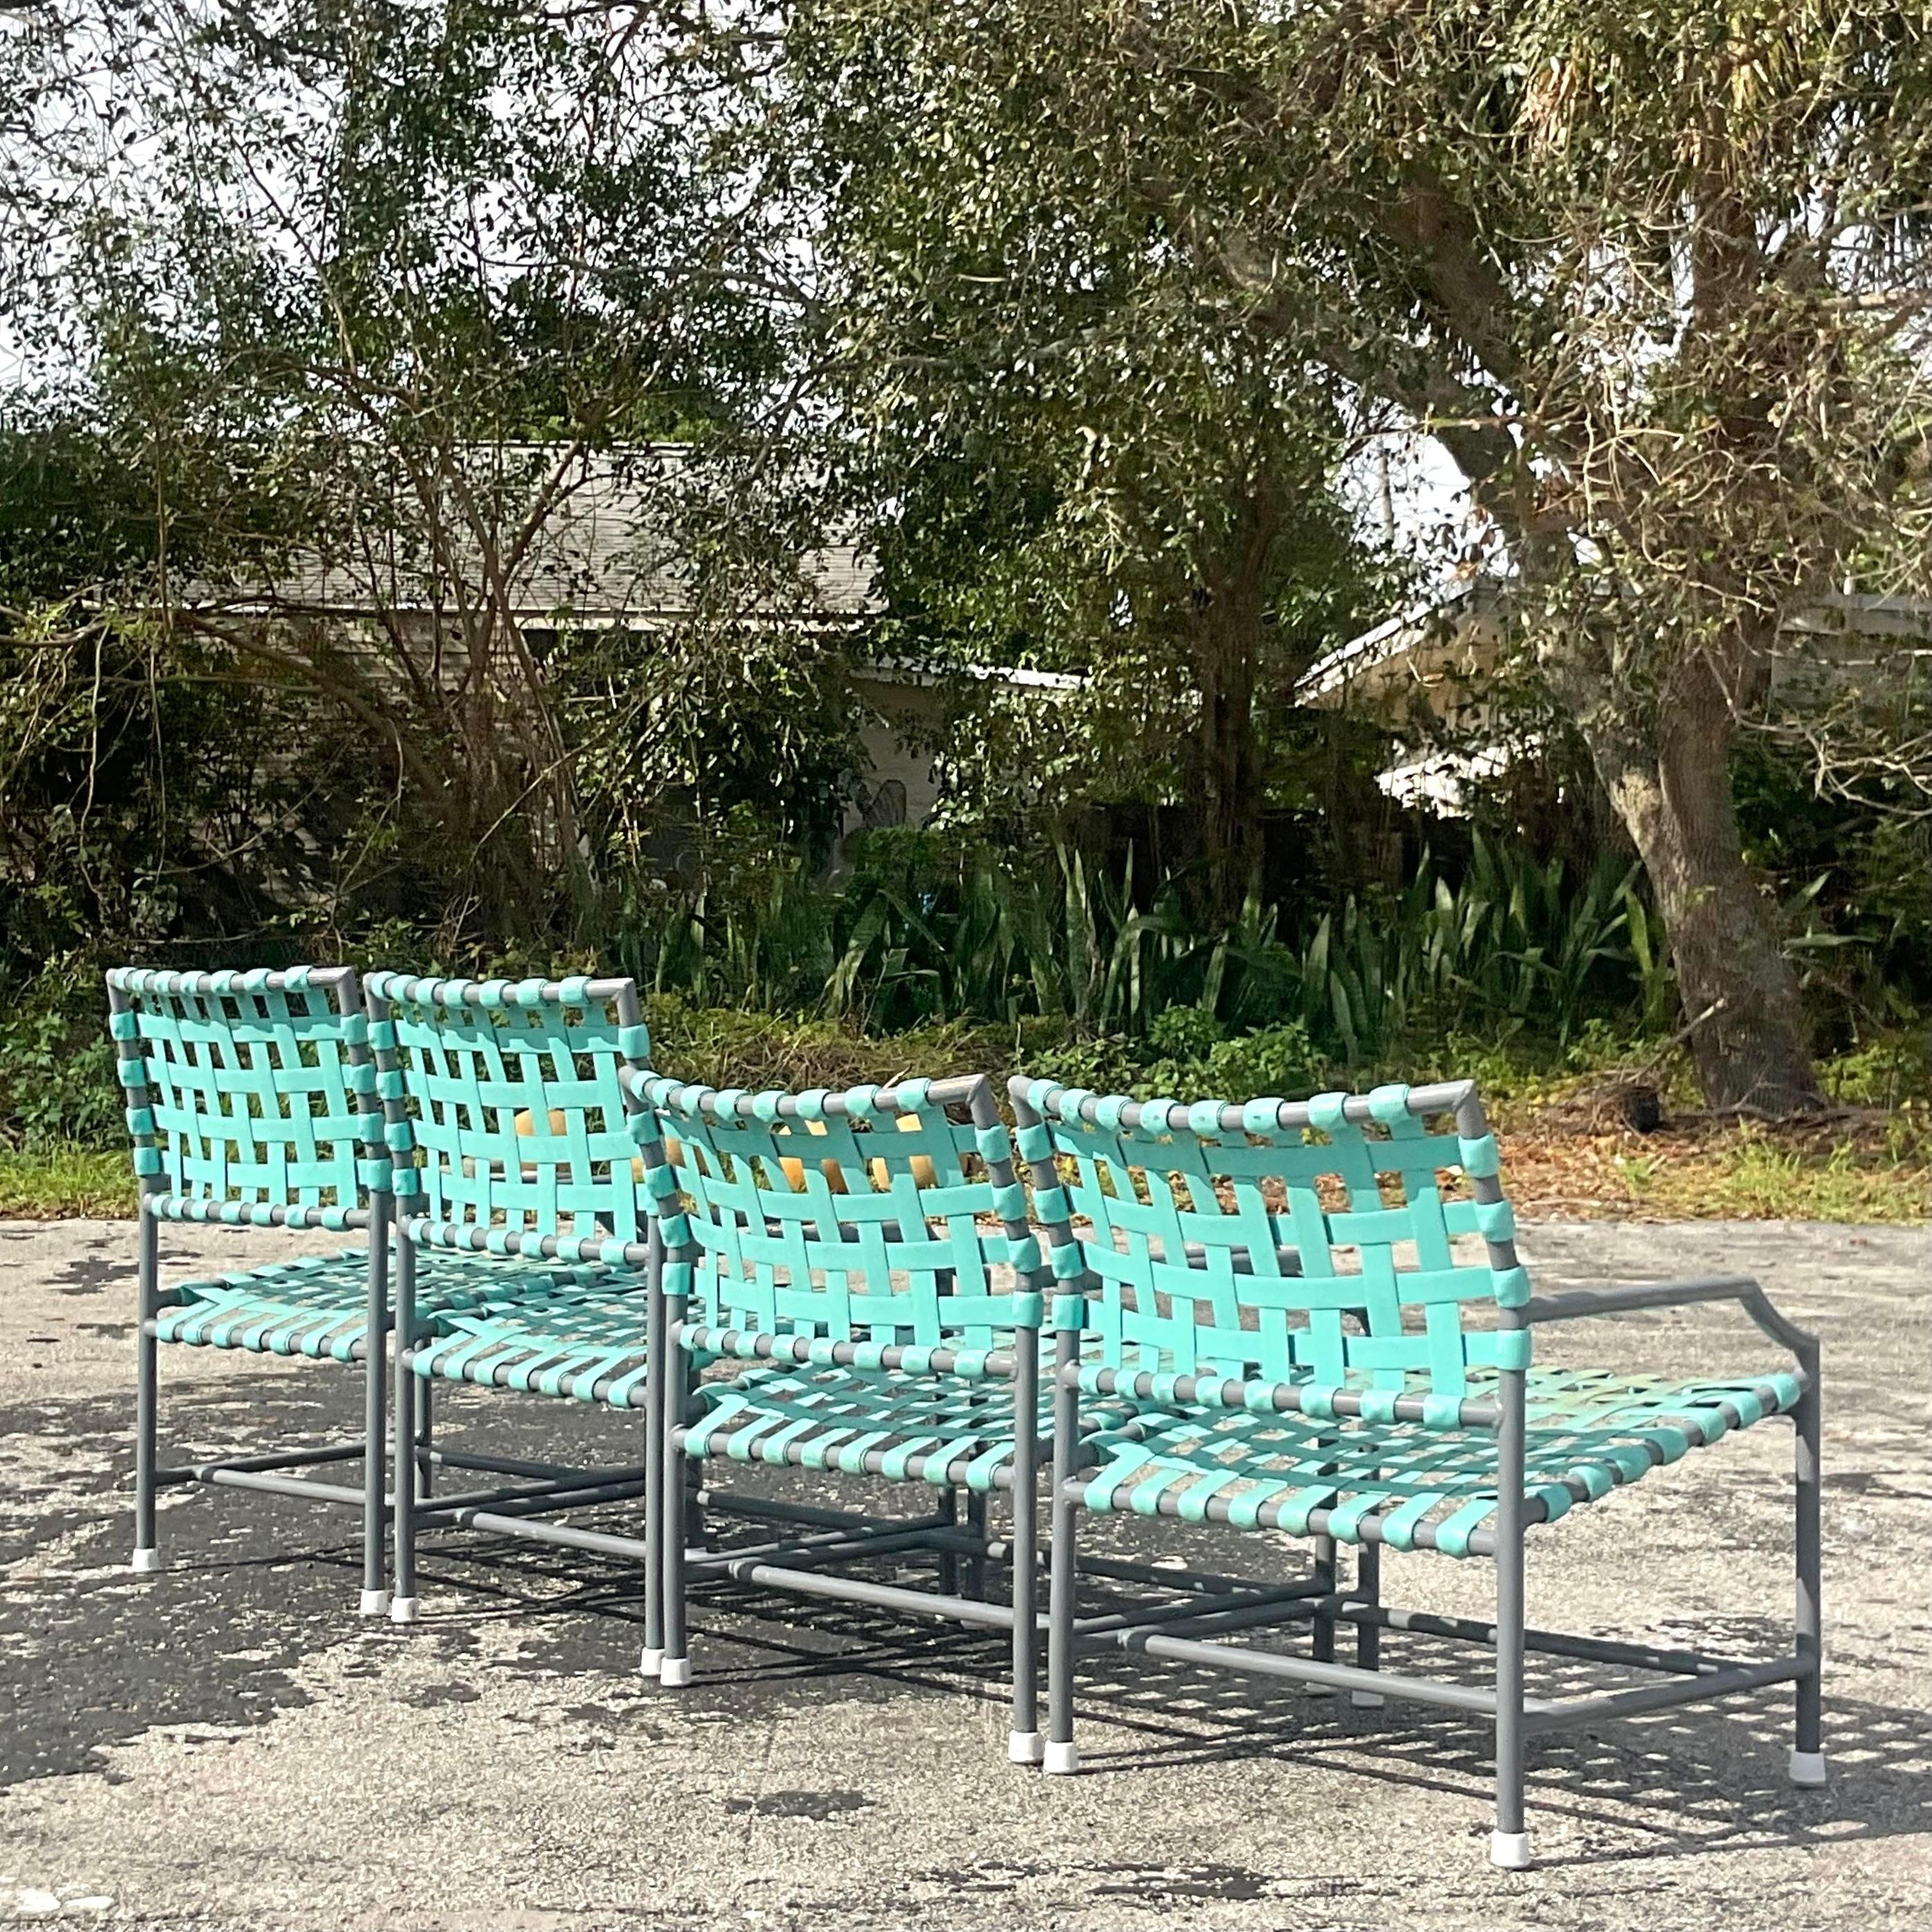 A fabulous set of vintage Coastal outdoor chairs. Made by the iconic Tropitone group and tagged below. Two dining chairs and two low lounge chairs. Brilliant jade green with smoke grey aluminum frame. Acquired from a Palm Beach estate.

Lounge